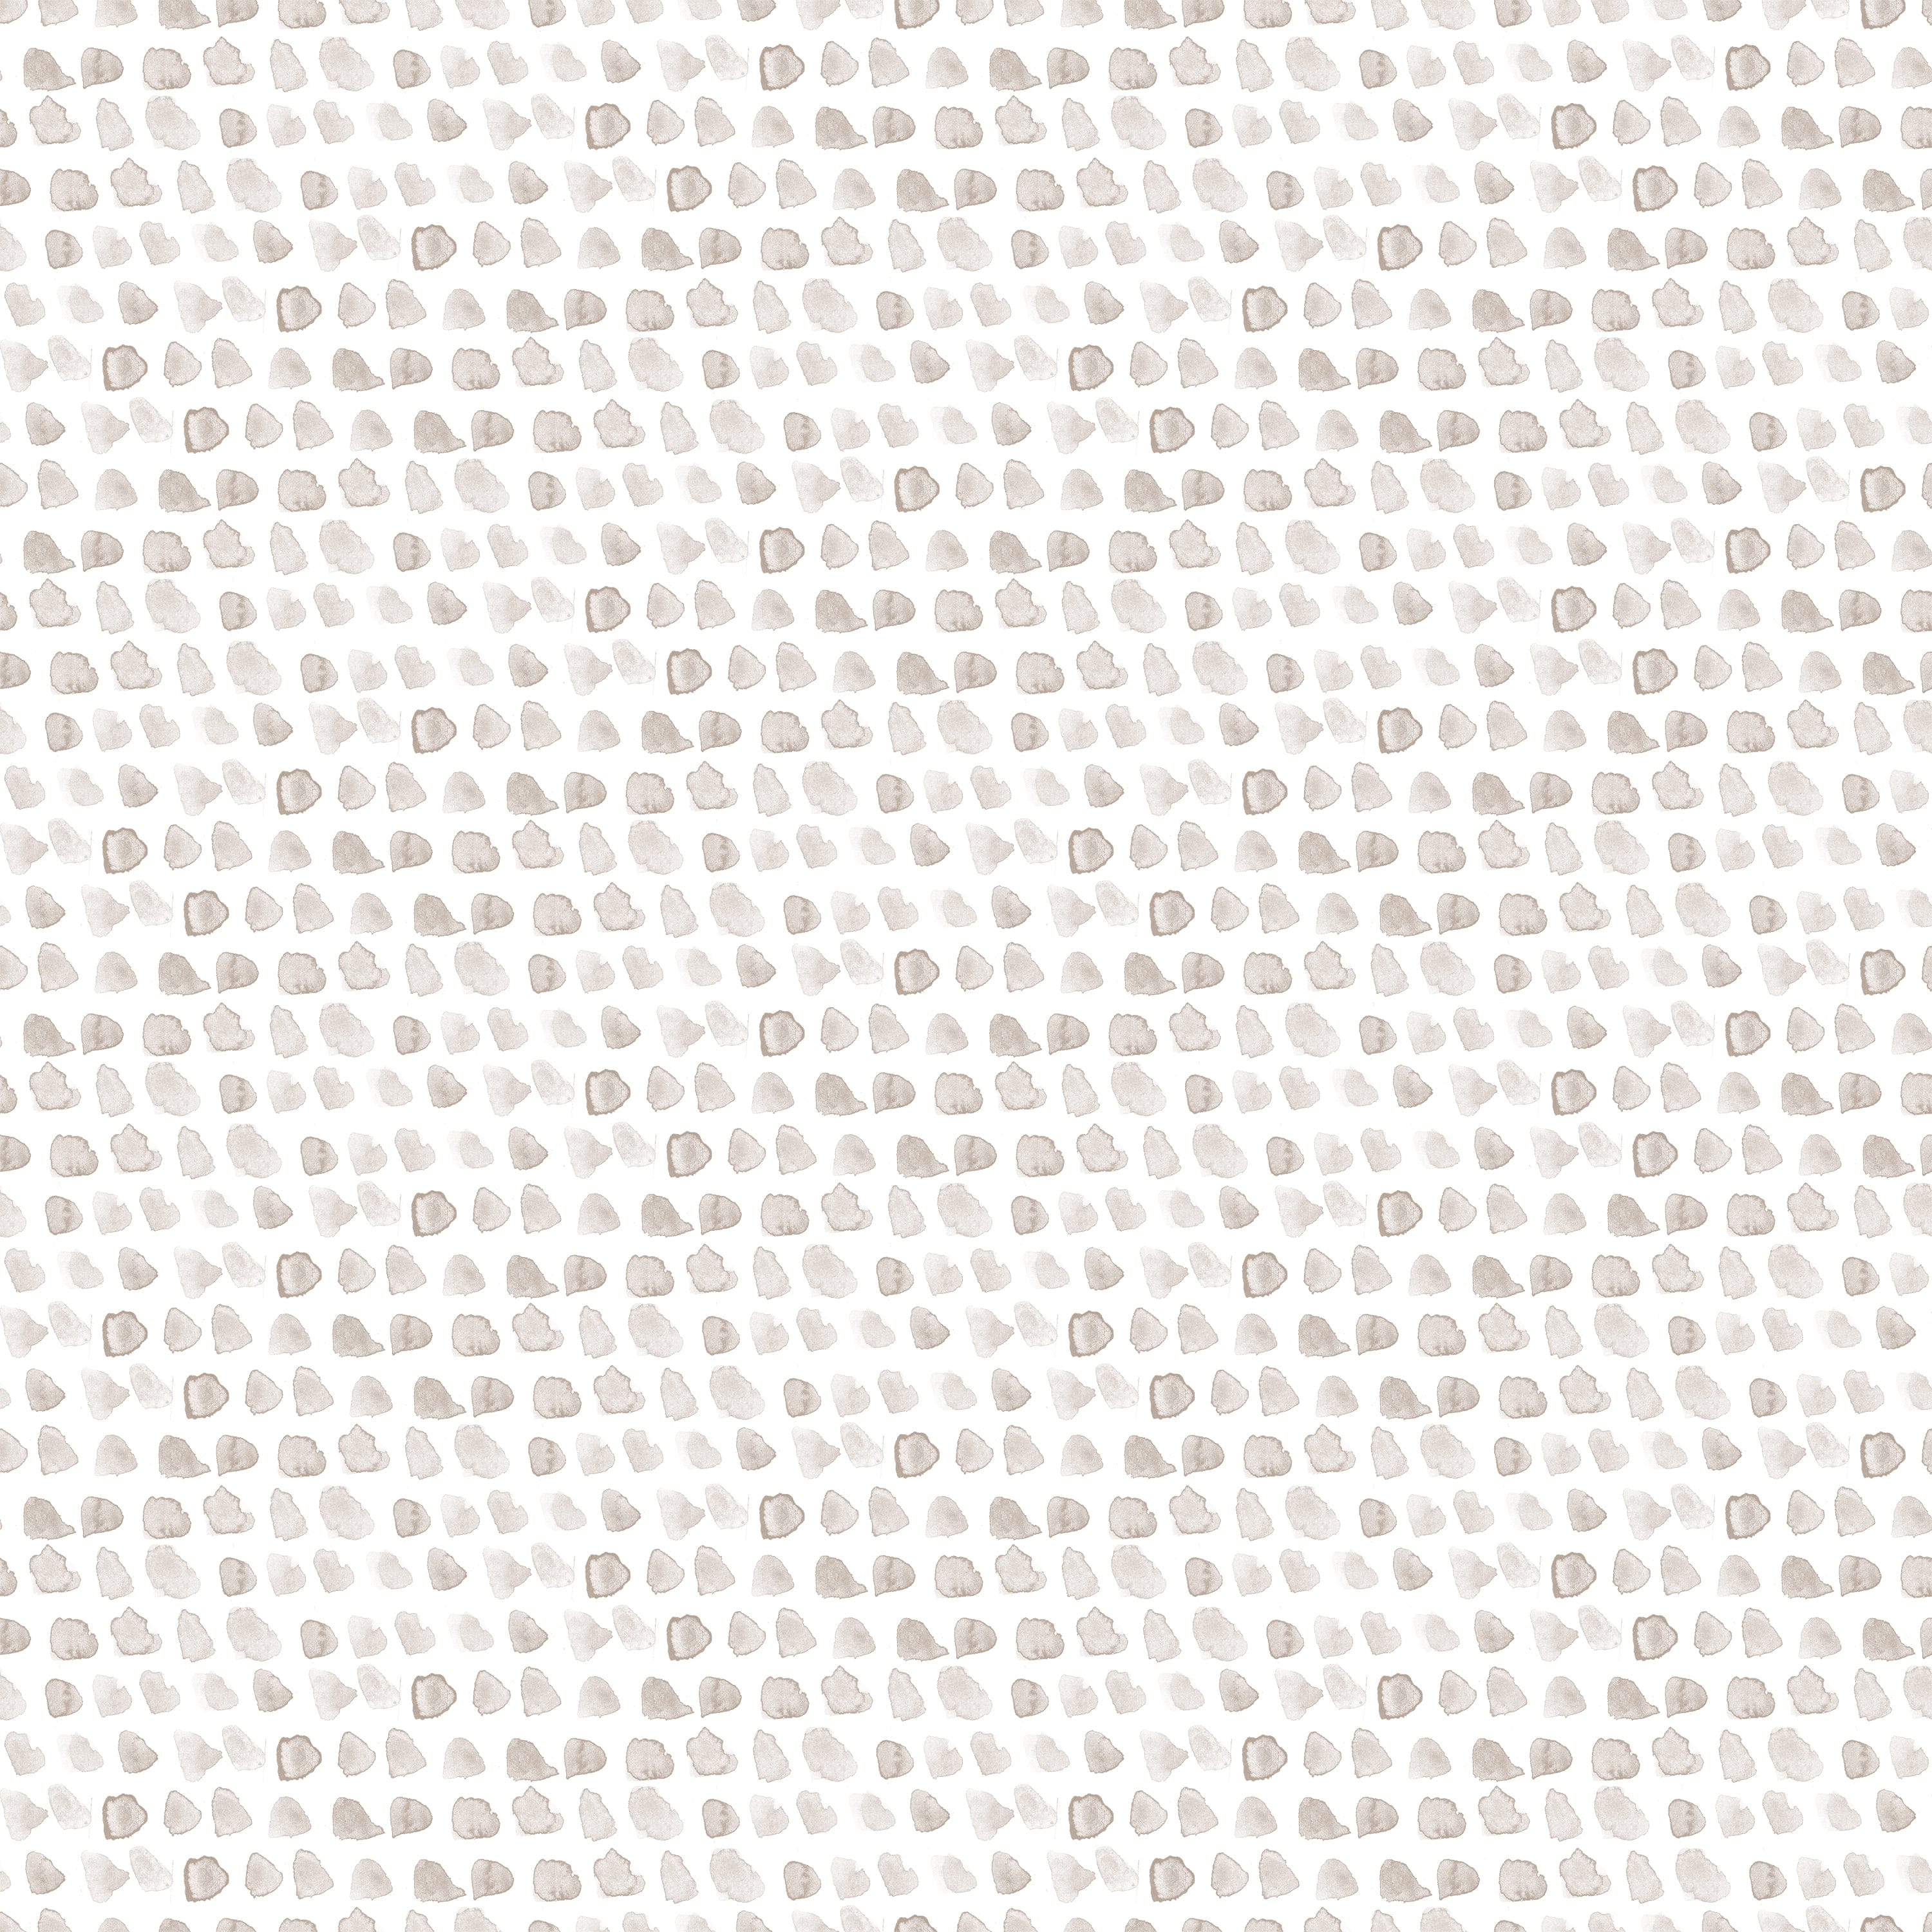 Close-up of Hand Painted Dots Wallpaper - Beige, featuring small, irregular beige dots systematically arranged on a white background, creating a subtle and elegant pattern.